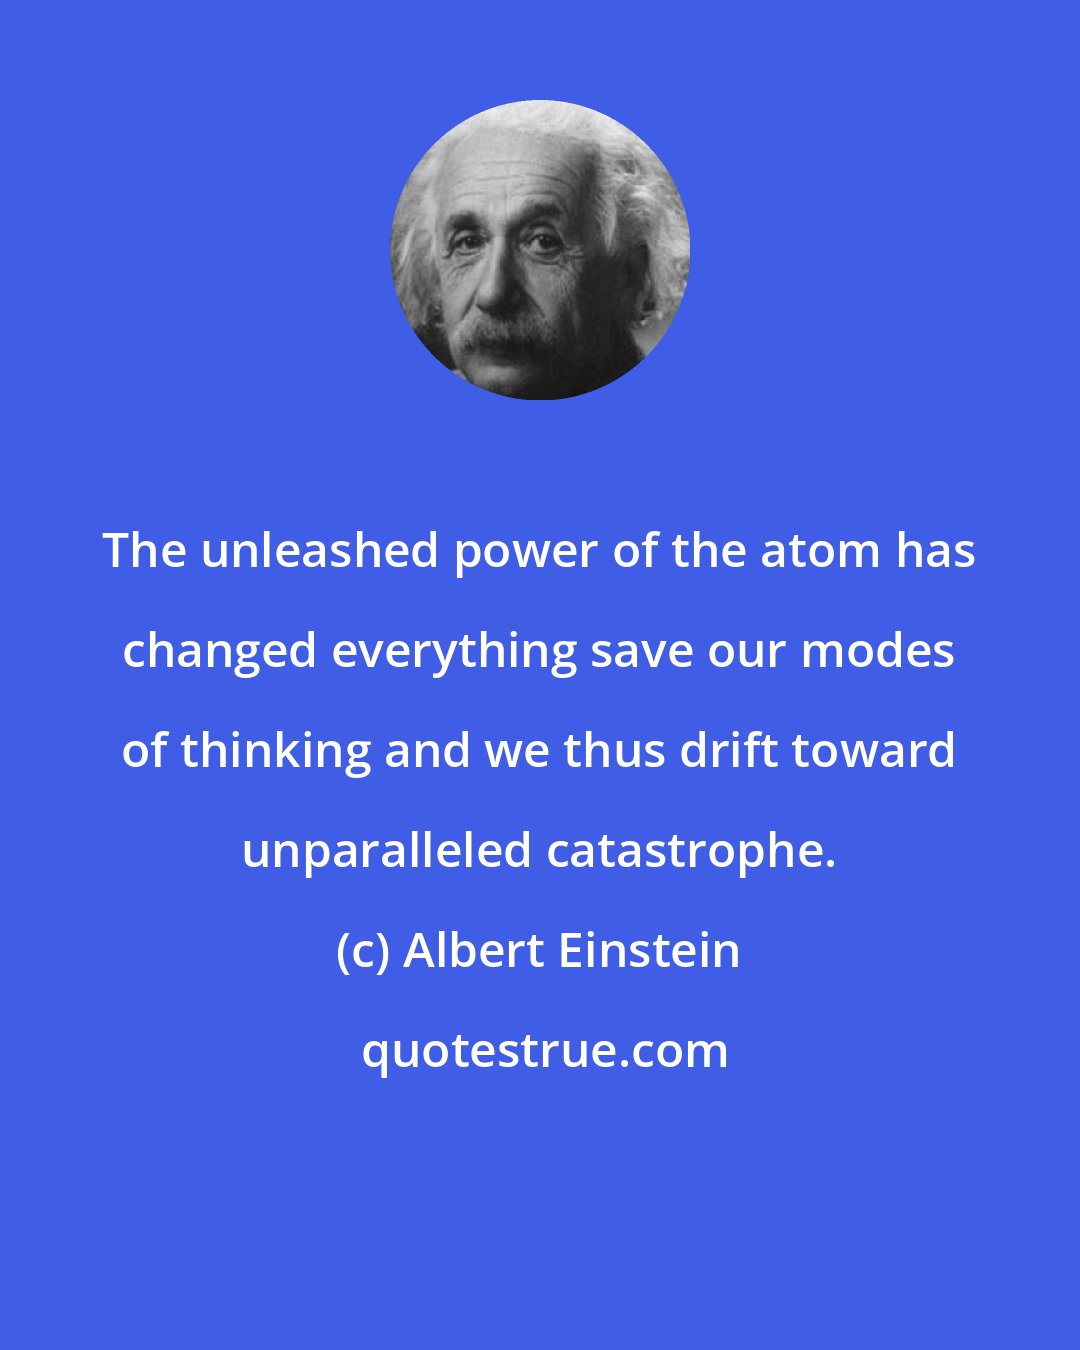 Albert Einstein: The unleashed power of the atom has changed everything save our modes of thinking and we thus drift toward unparalleled catastrophe.